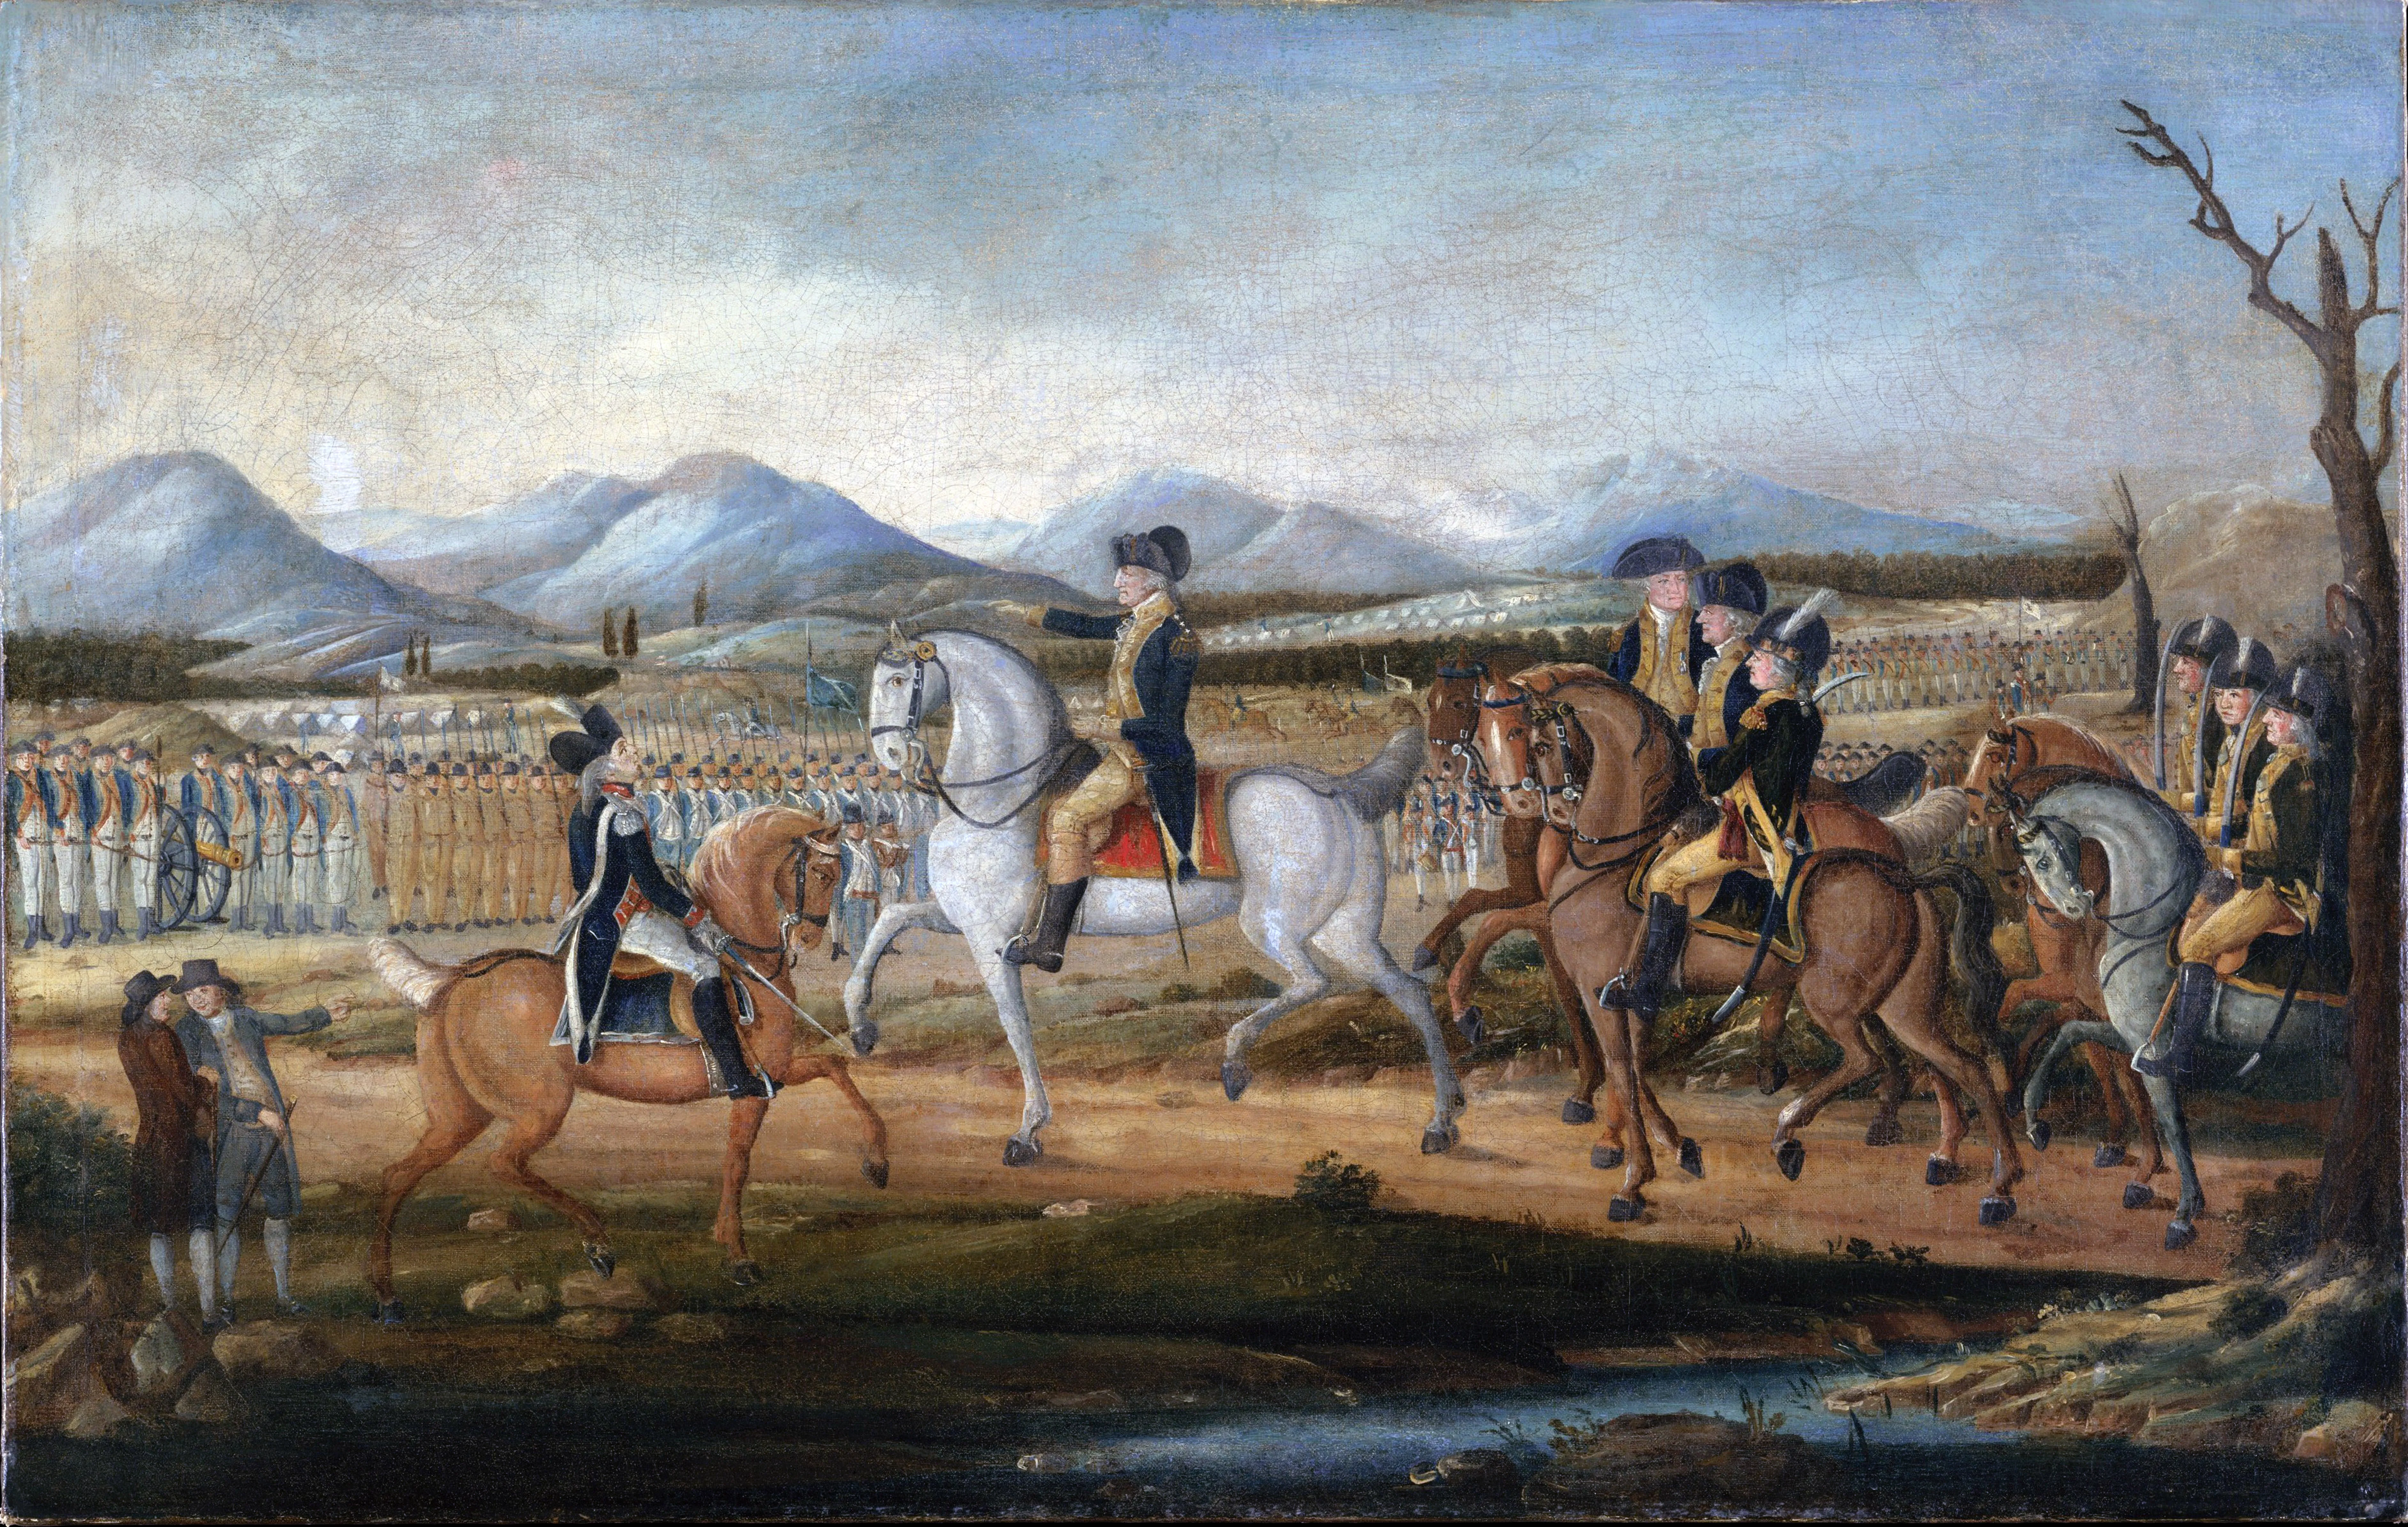 Washington sitting upon a horse, giving out orders to another officer while rows of men watch.